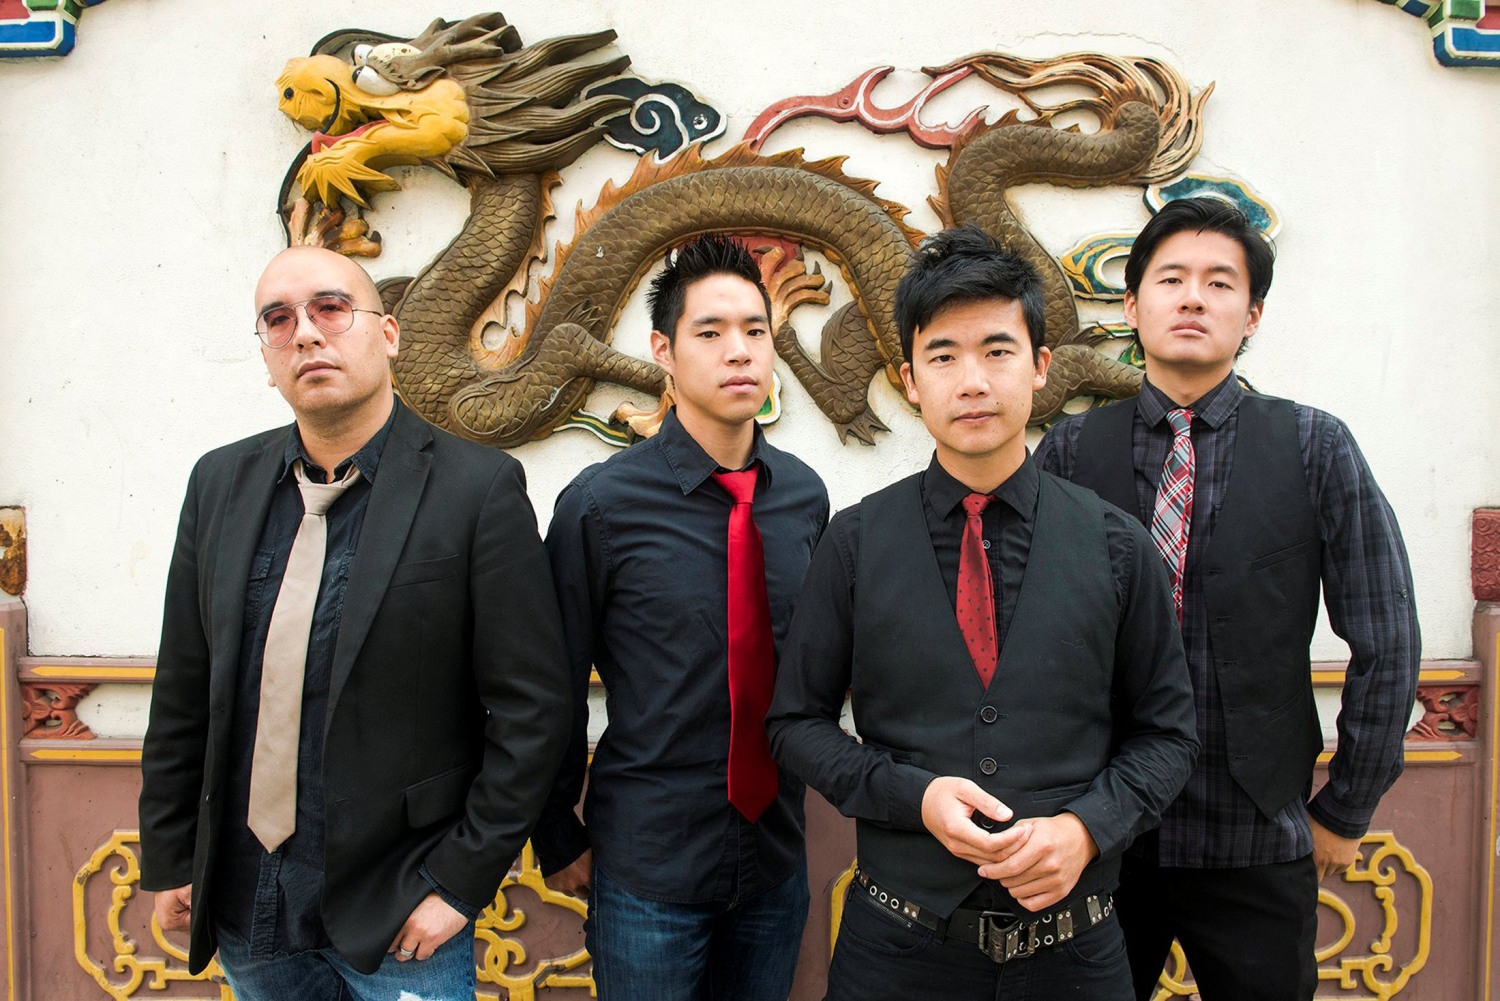 Opinion: At Supreme Court, the Slants Are 'Fighting for More Than a Band  Name